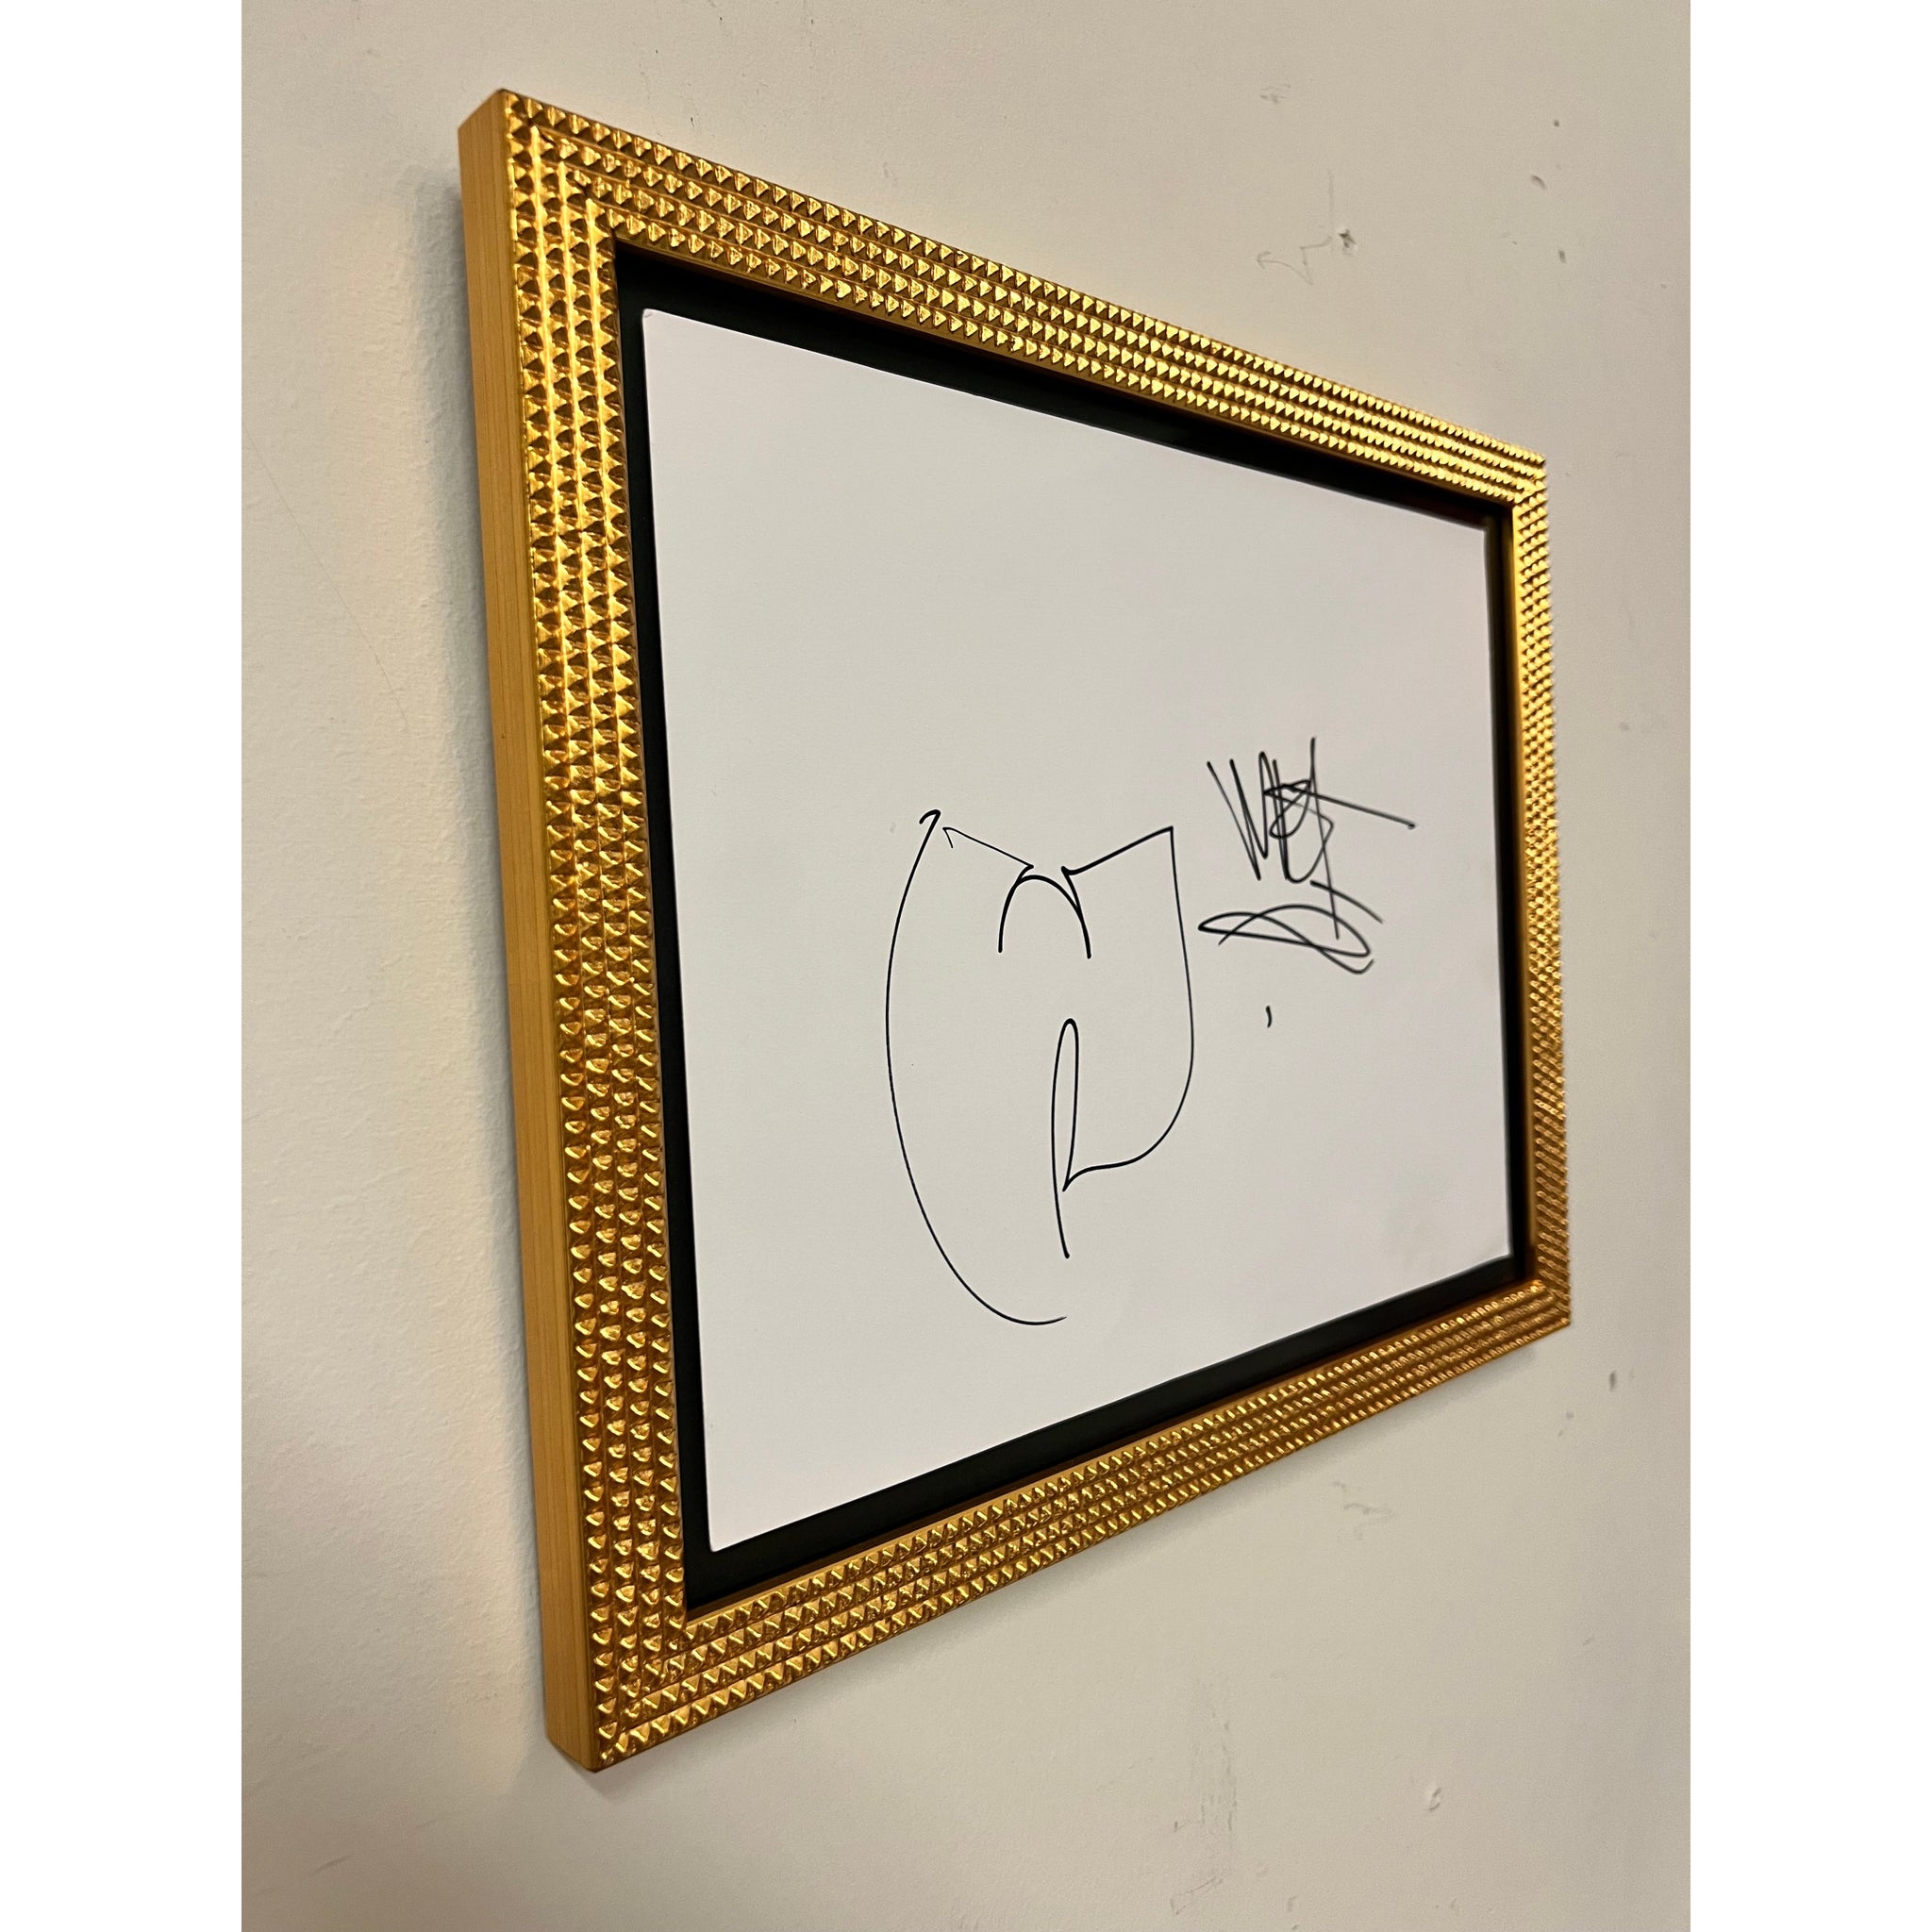 Kanye West - Autographed 8 x 10 Photo with Bear Sketch – MODCLAIR